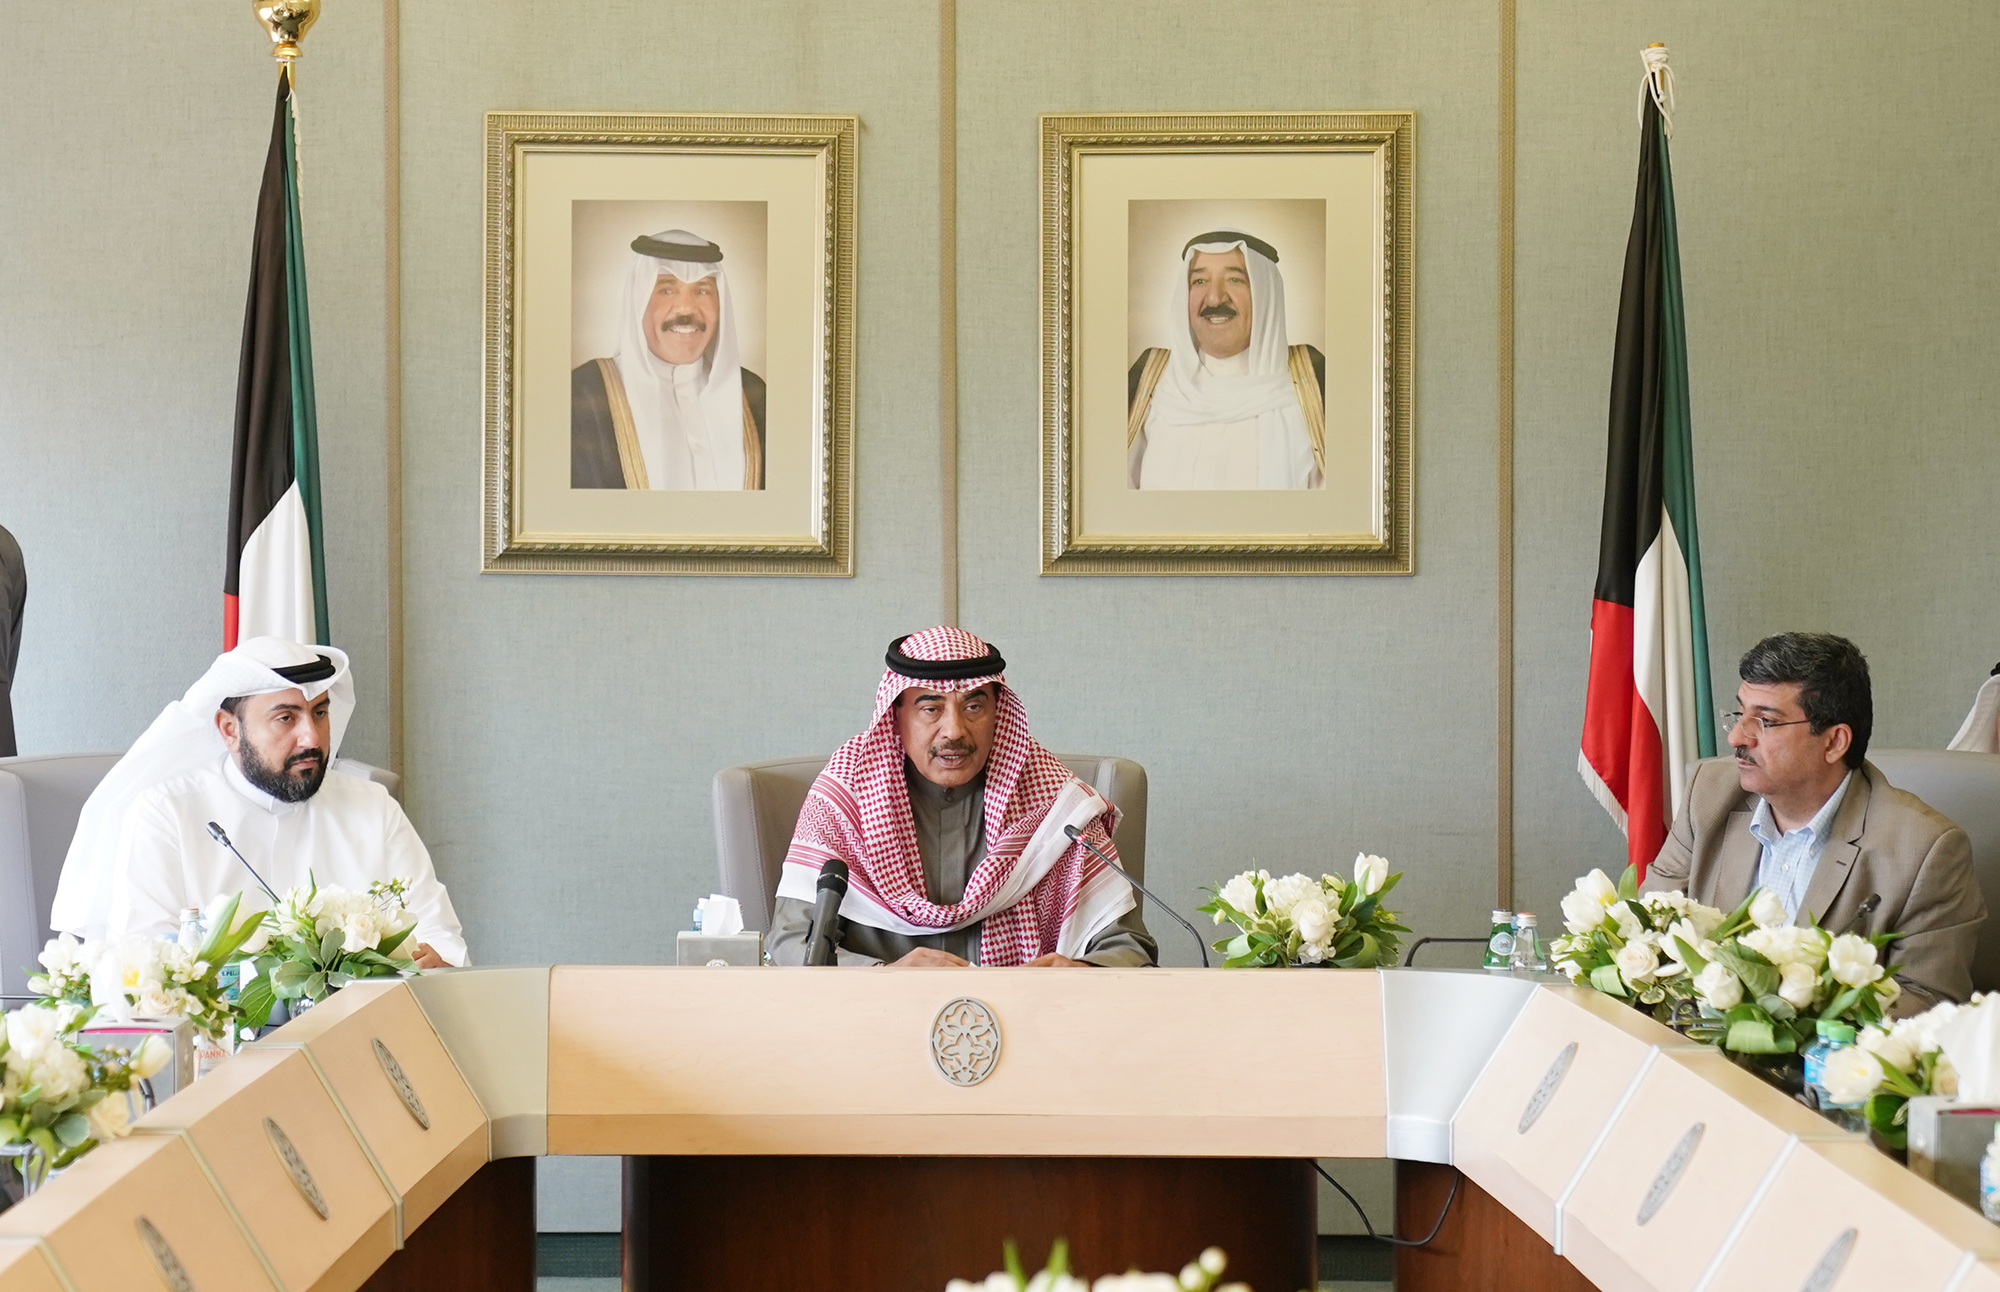 His Highness the Prime Minister during a visit to the MoH headquarters